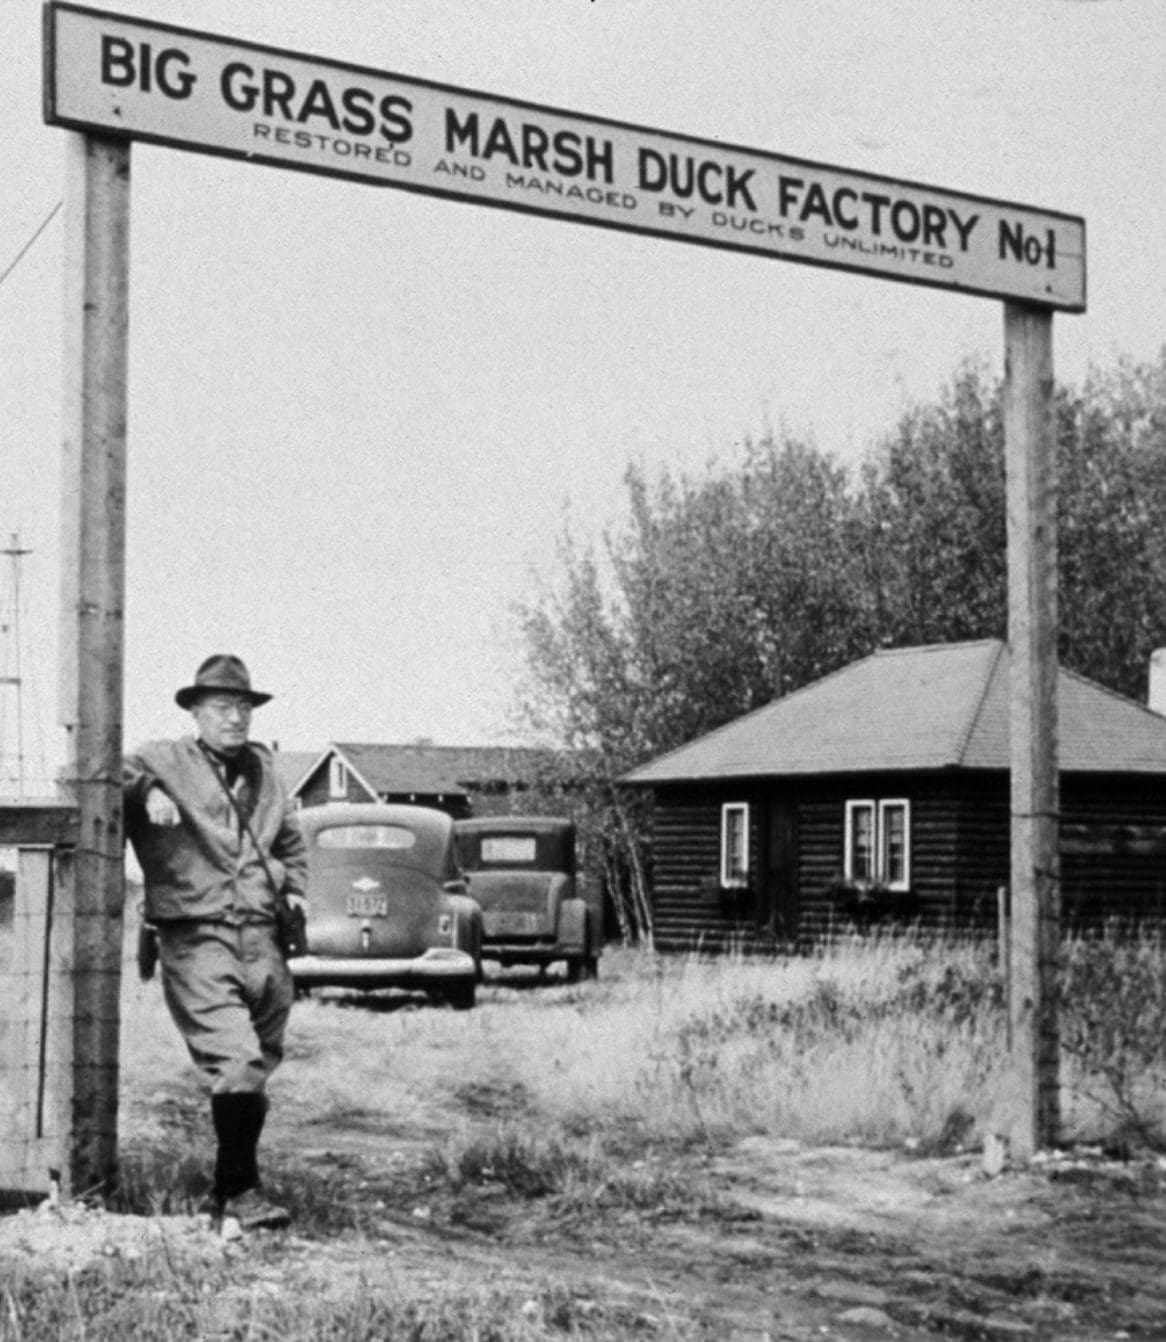 Historic Big grass marsh sign, the first Ducks Unlimited Canada project.